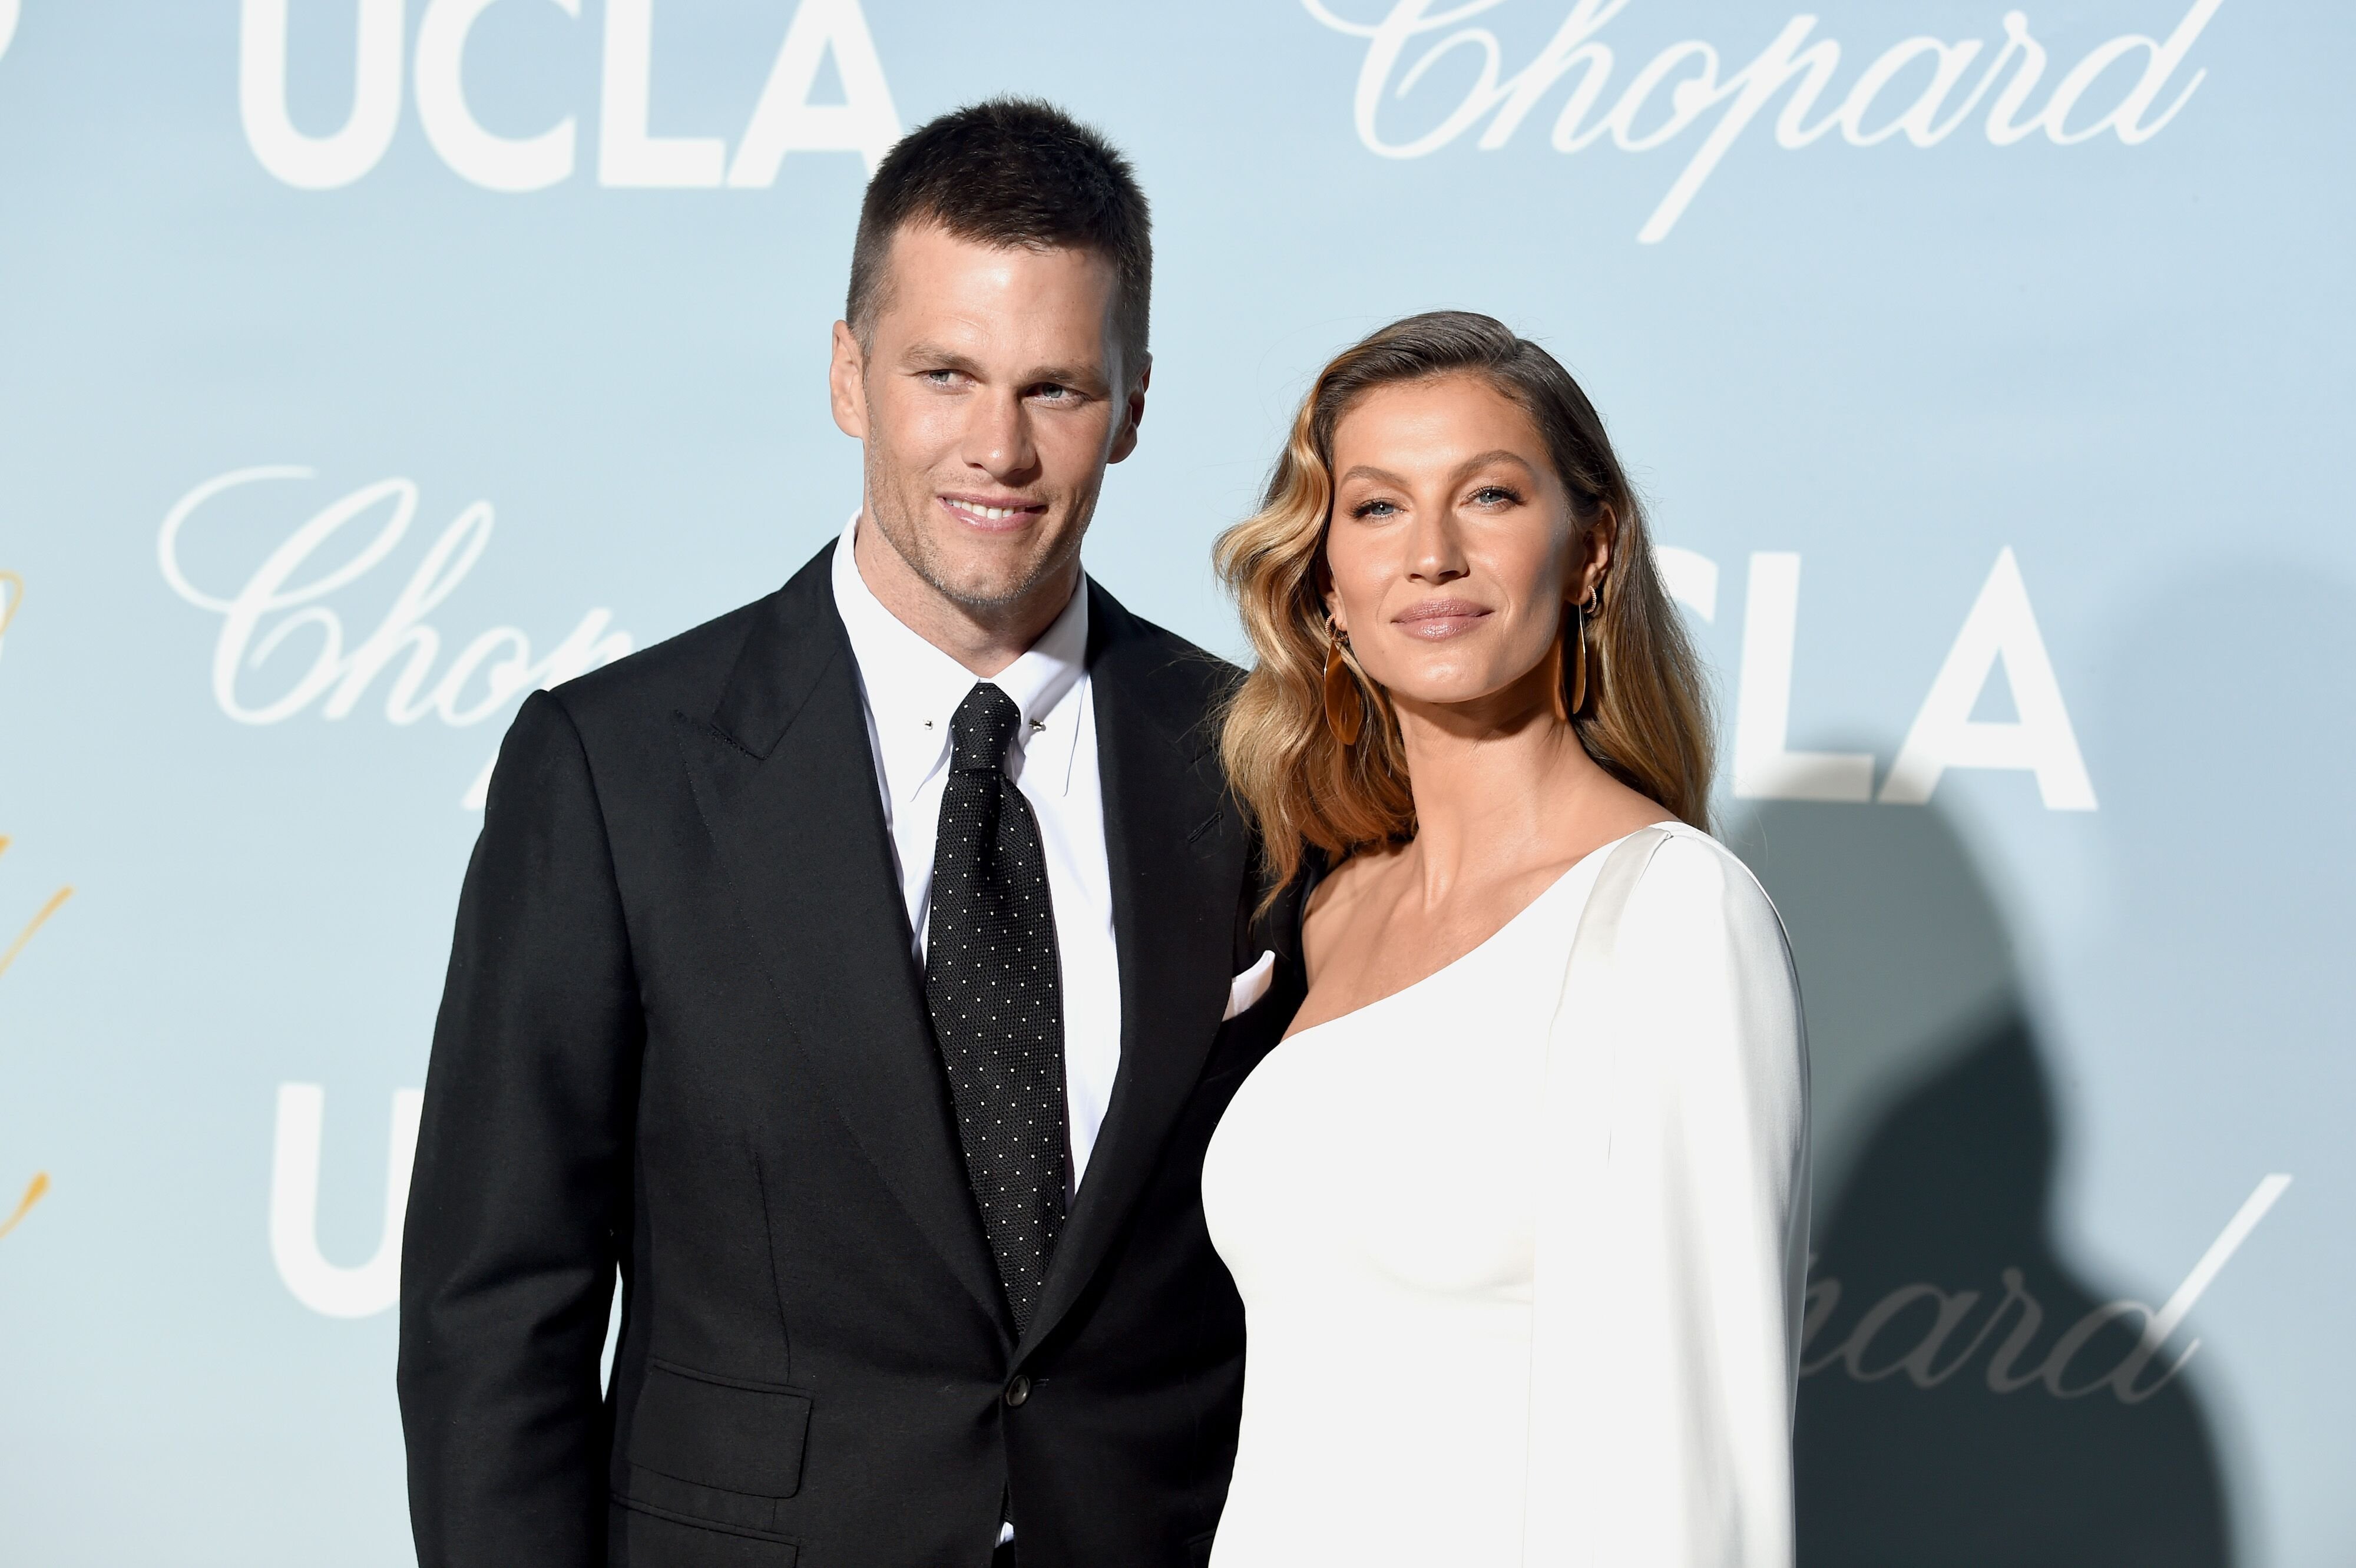 Tom Brady and Gisele Bündchen attends the 2019 Hollywood For Science Gala at Private Residence on February 21, 2019 in Los Angeles, California. | Photo: Getty Images